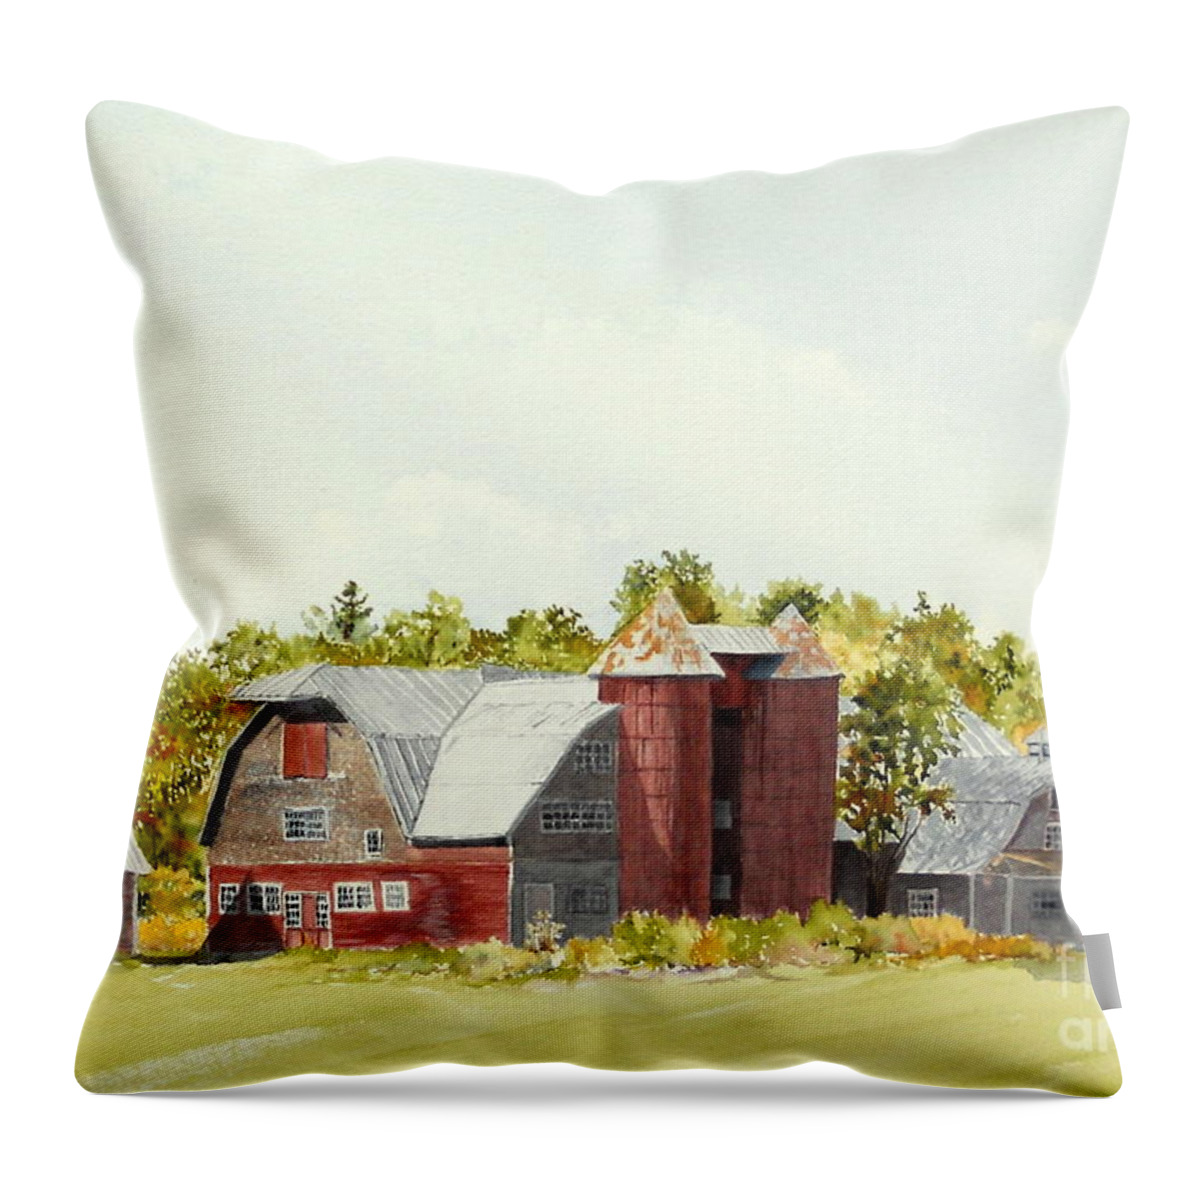 Barn Throw Pillow featuring the painting Mount Victoria Farm by Jackie Mueller-Jones